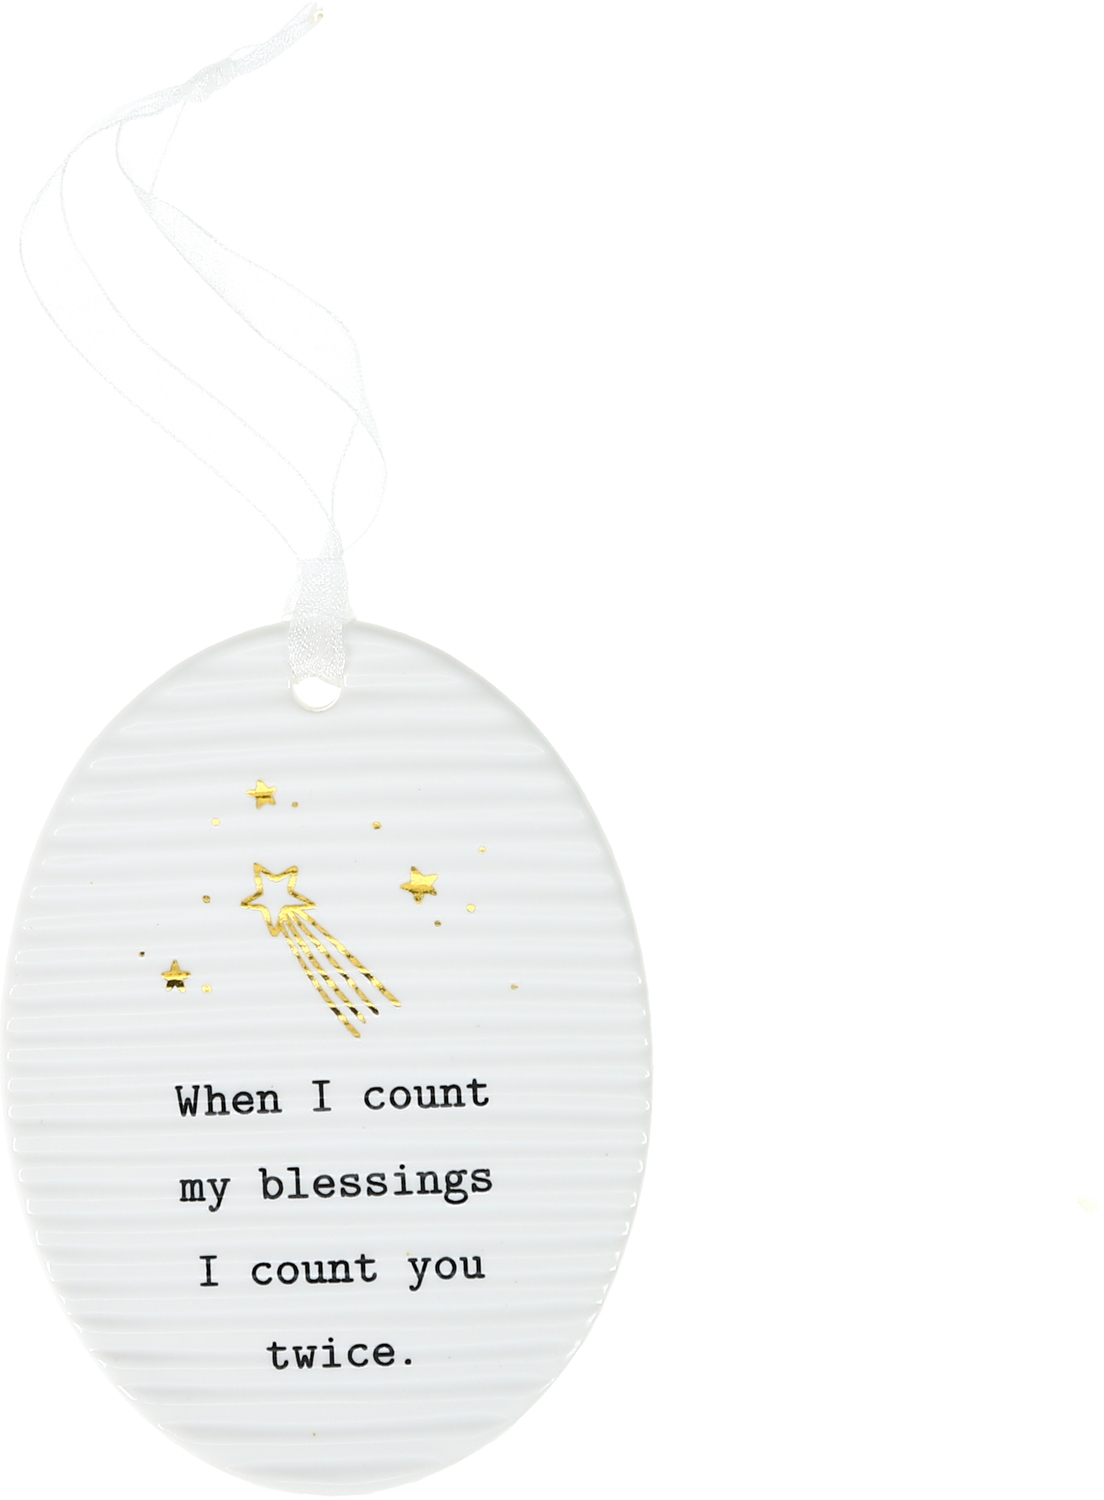 I Count You Twice by Thoughtful Words - I Count You Twice - 3.5" Hanging Oval Plaque